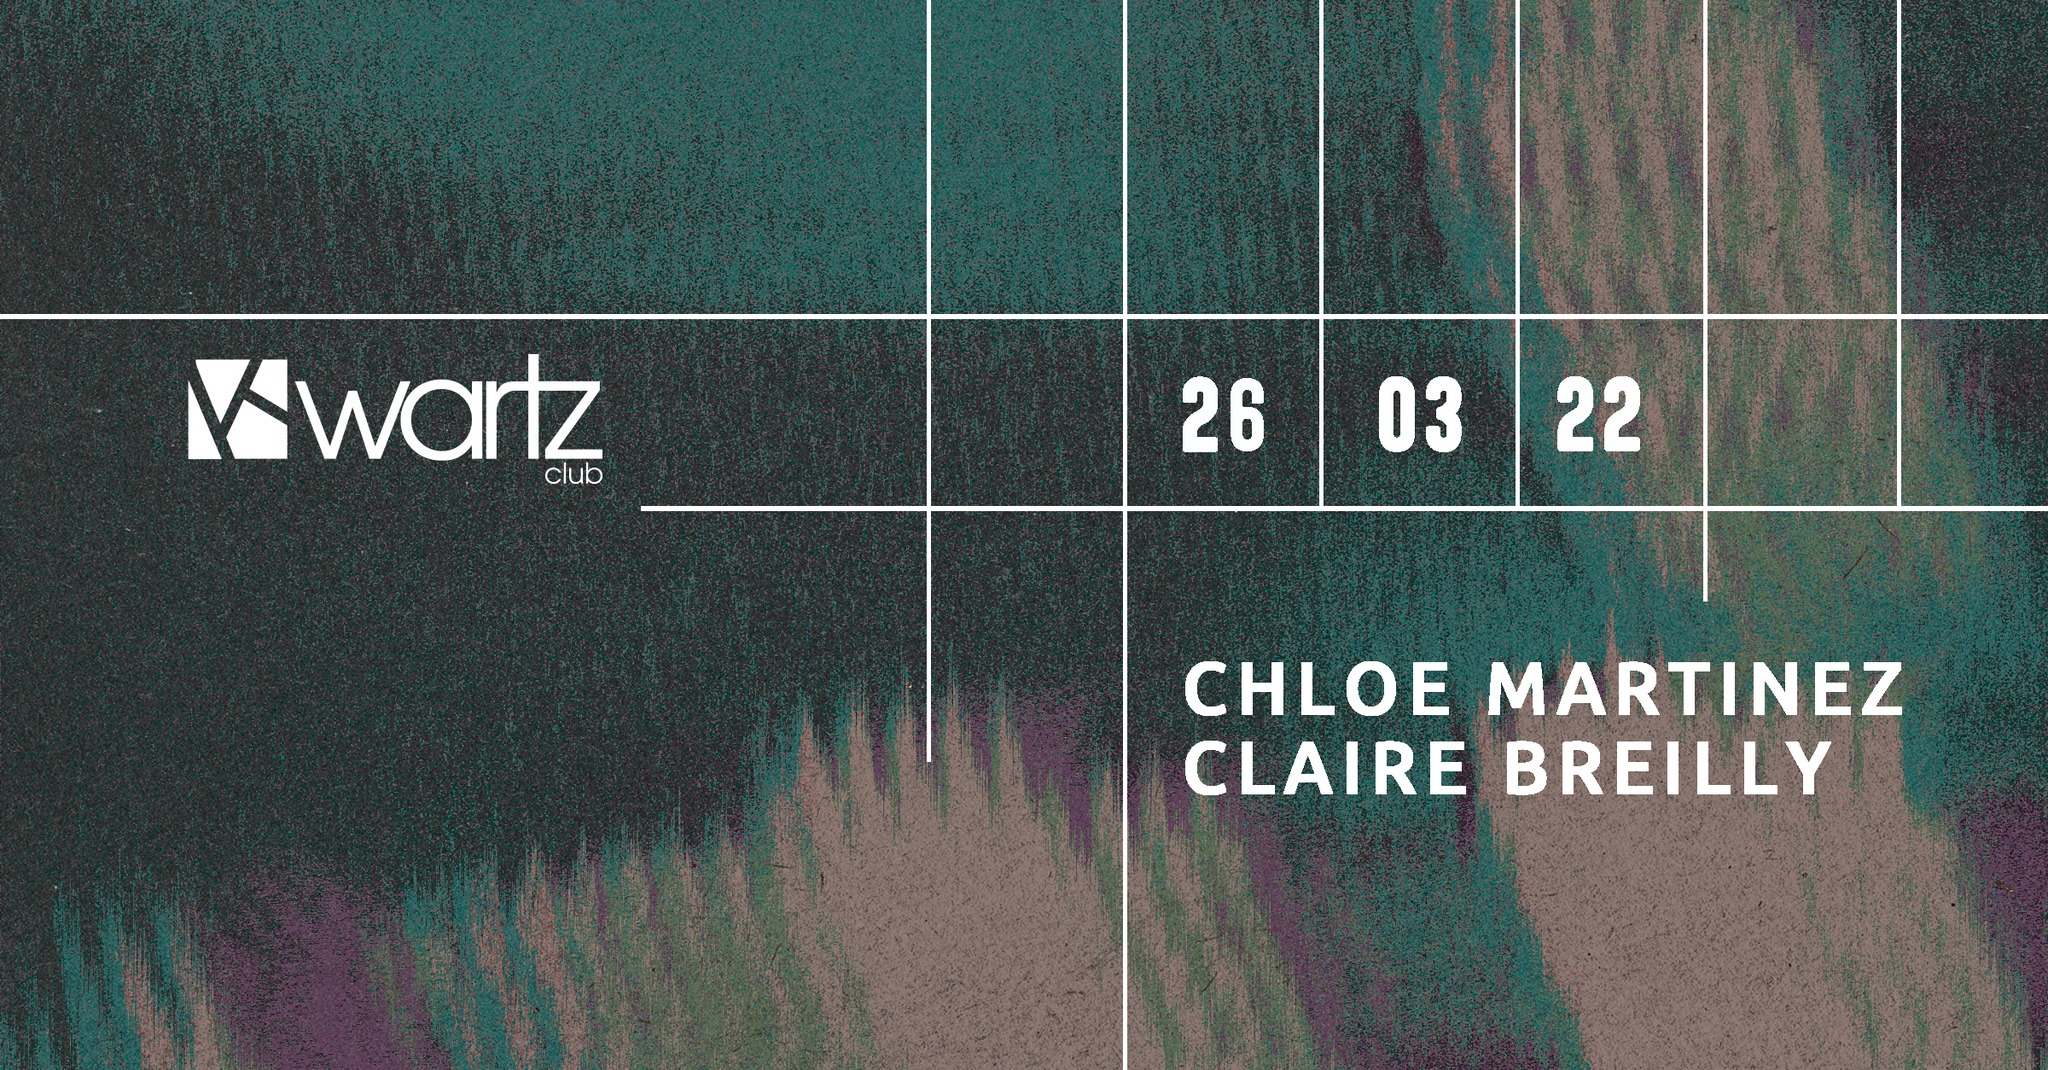 Chloé Martinez, Claire Breilly - Flyer front